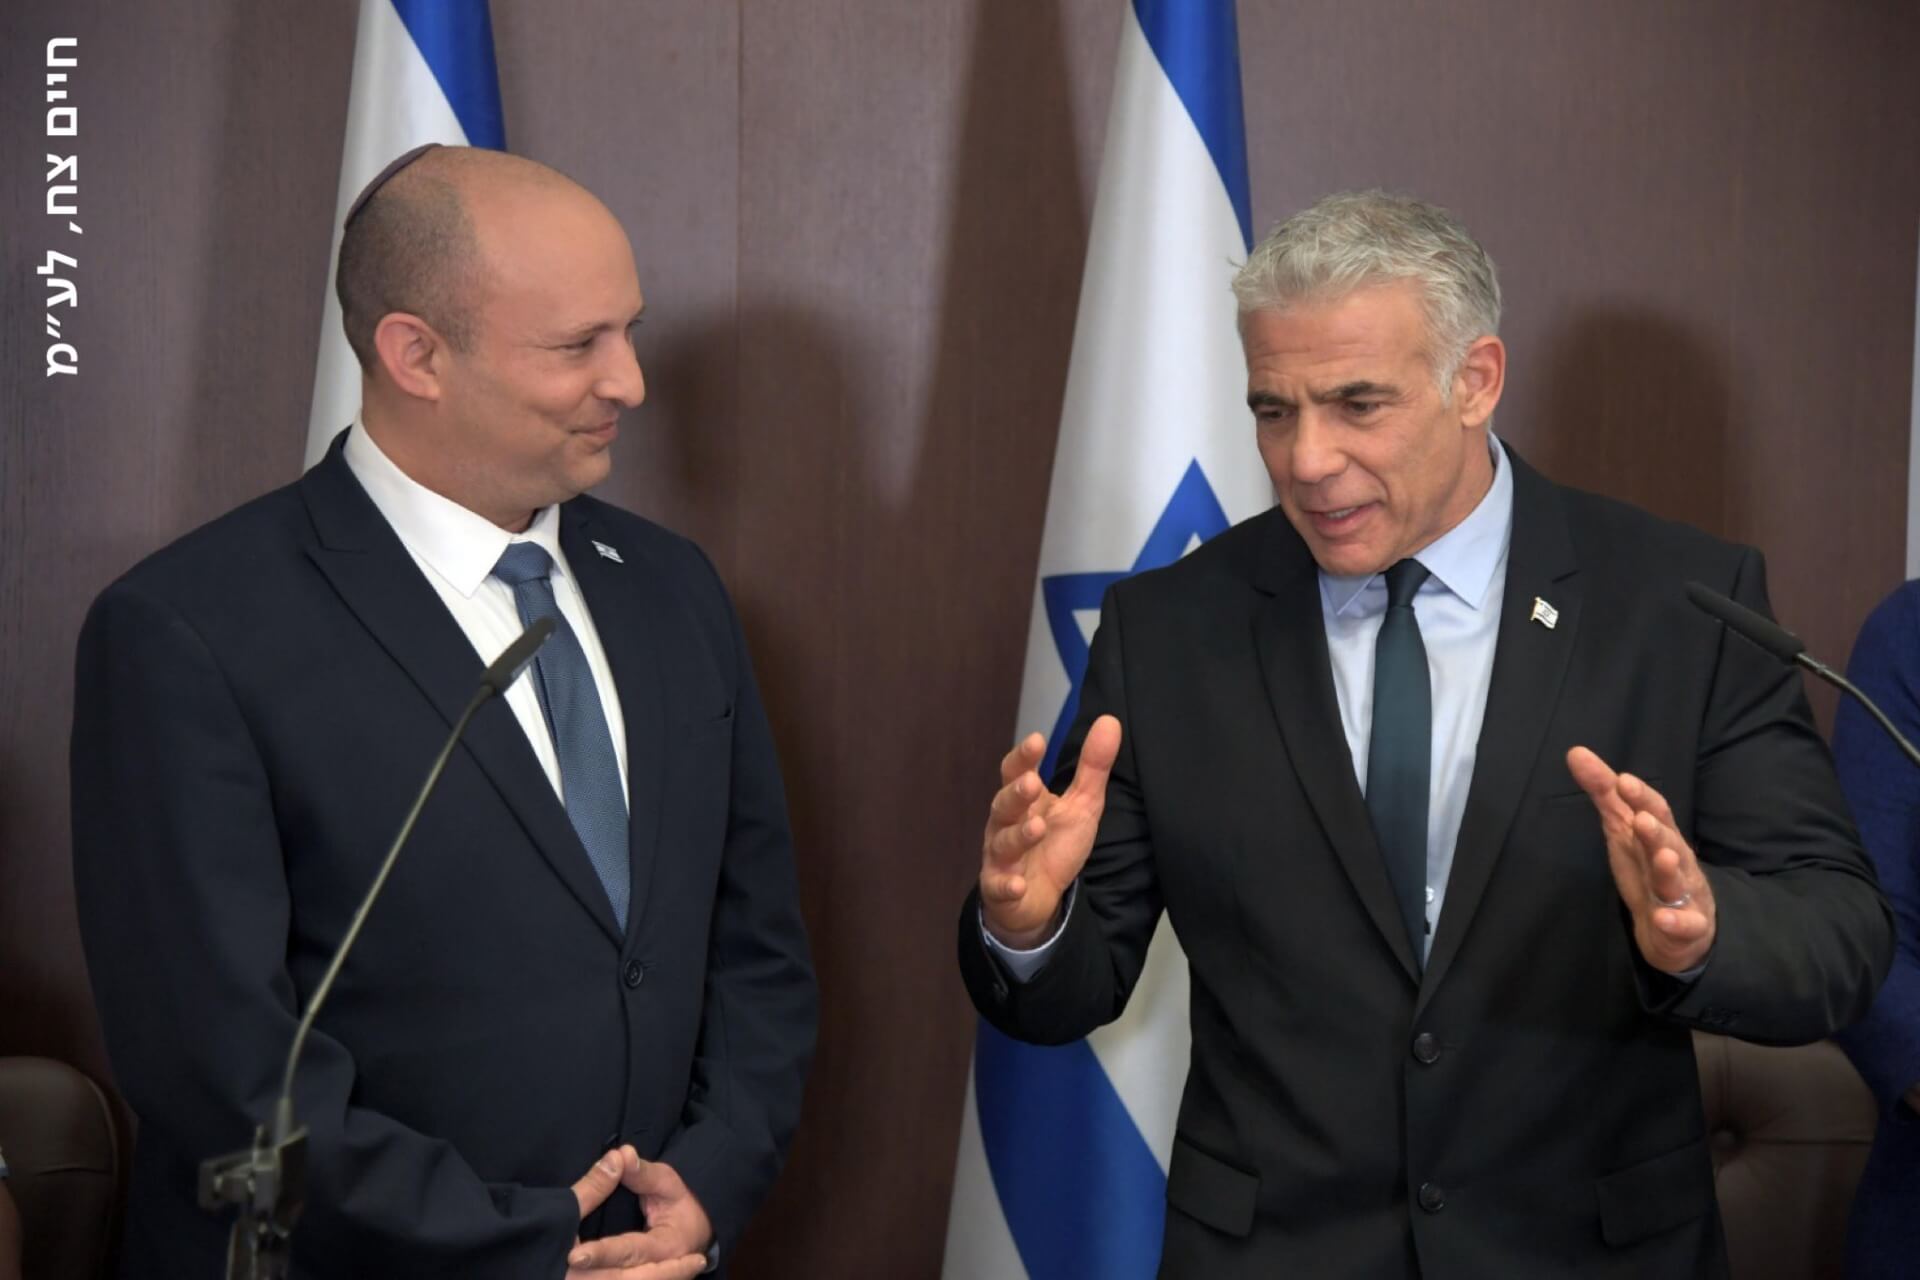 Israeli Parliament Dissolved, Lapid Appointed PM Ahead of Fifth Election in Three Years